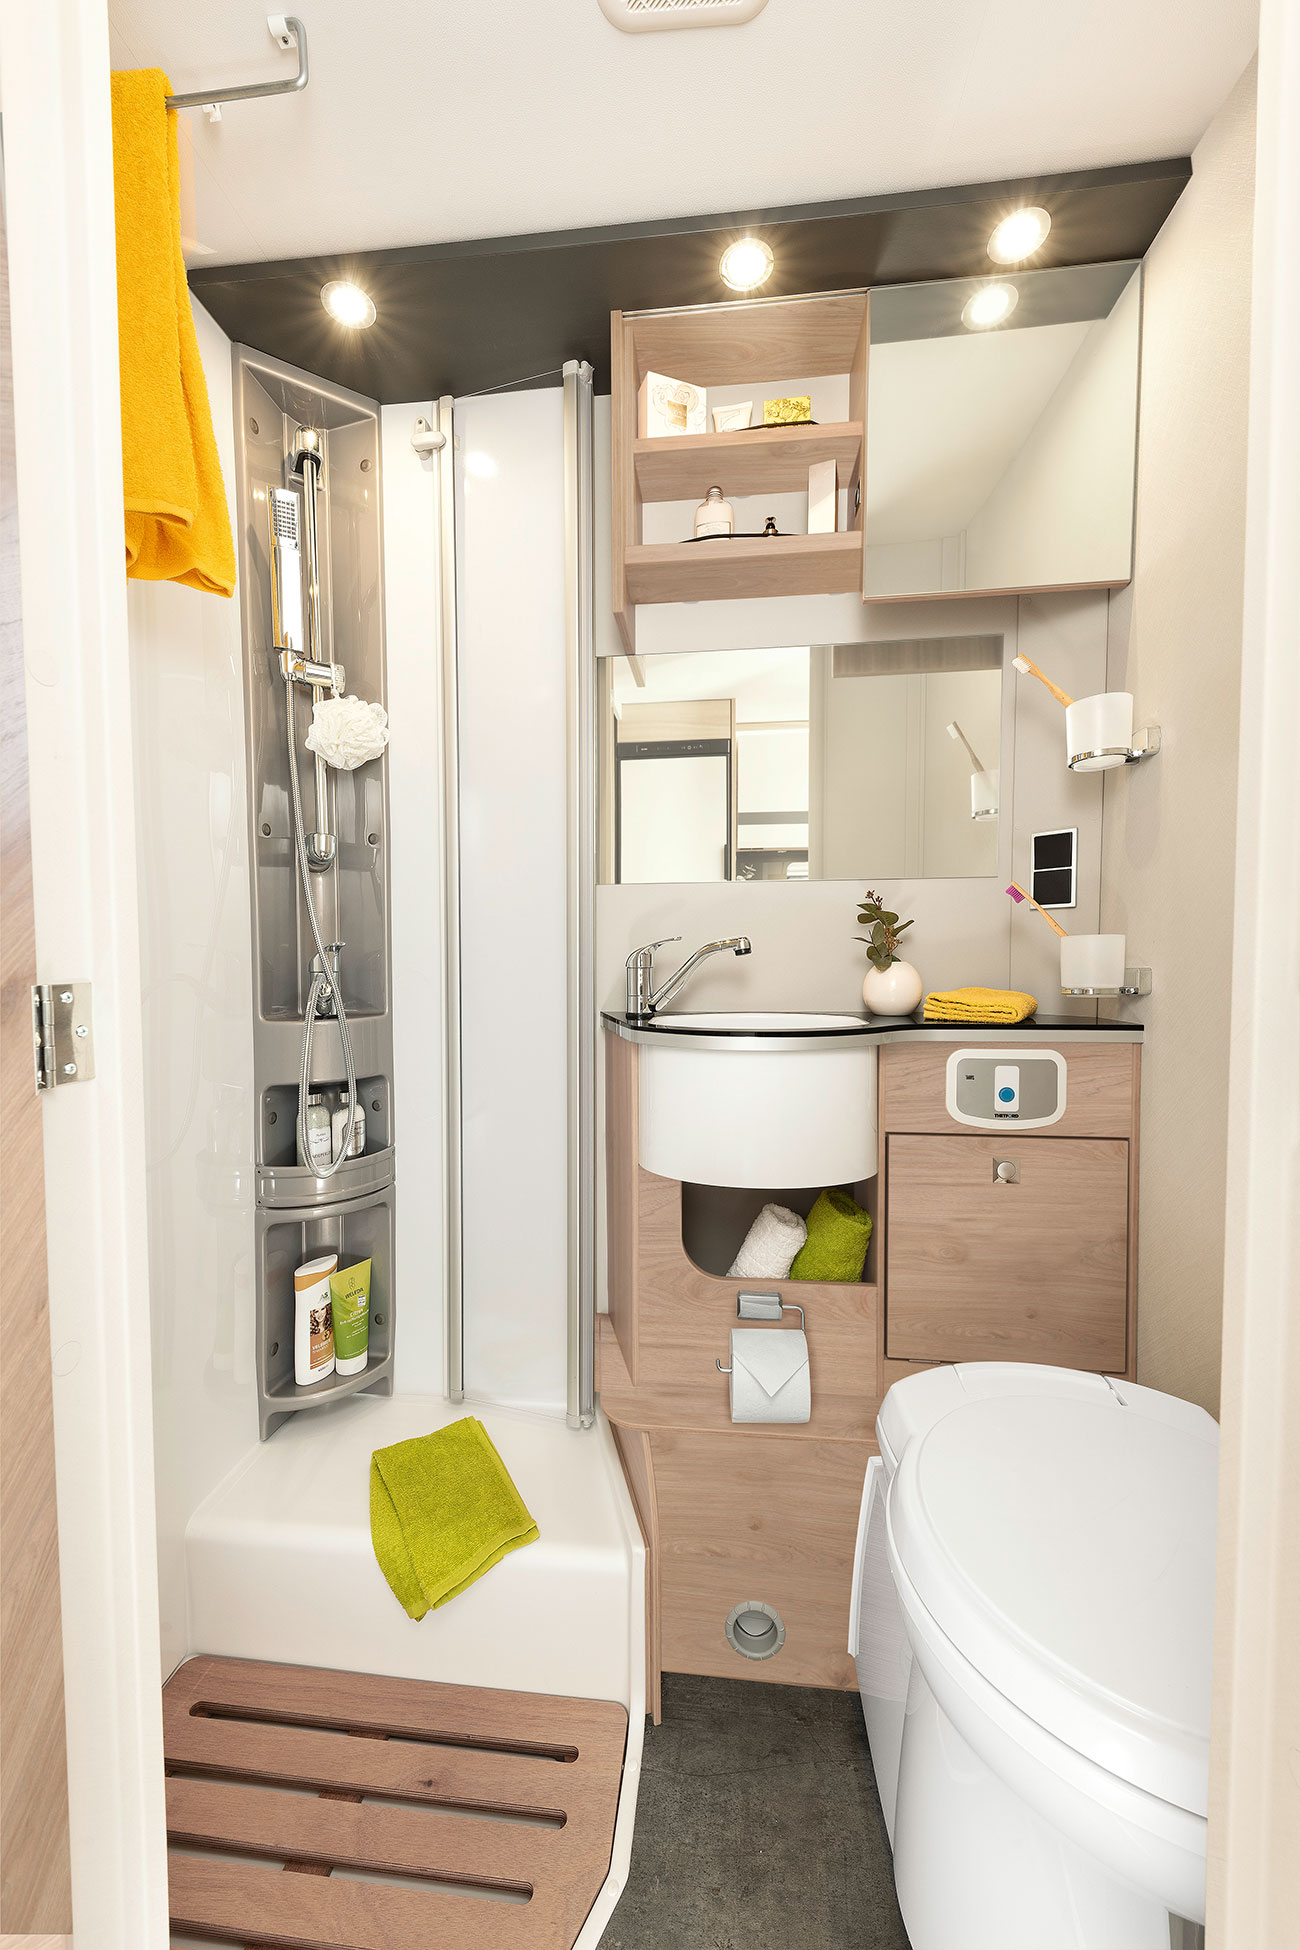 The I 6 comes with a roomy, separate shower, an easy-to-access sink and lots of storage space • I 6